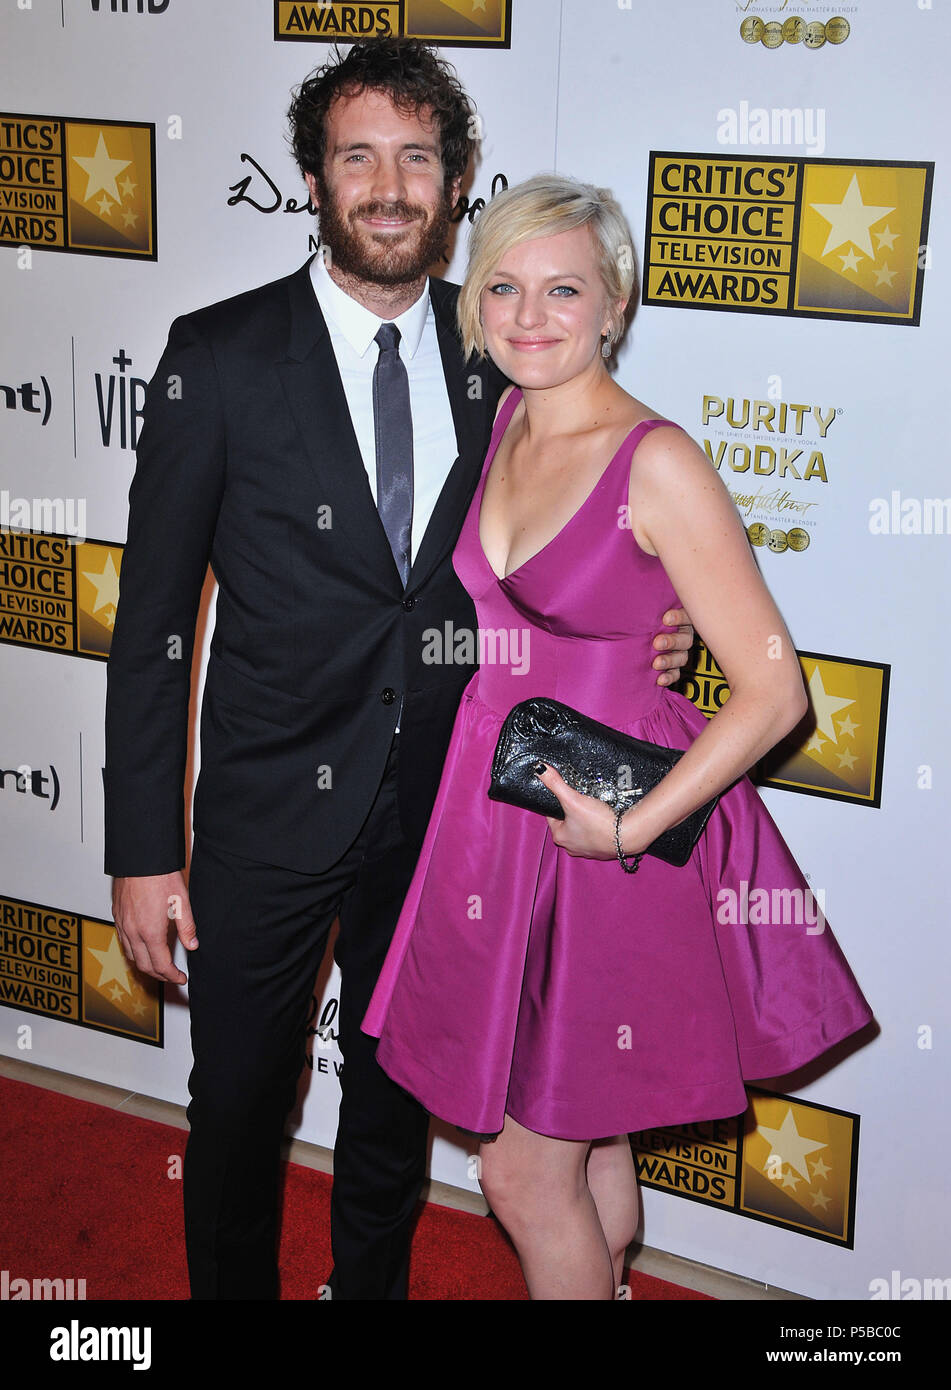 Elisabeth Moss, Thomas M. Wright arriving at Broadcast Tel. Awards 3rd  Critic s Choice at the Beverly Hilton Hotel in Los Angeles.Elisabeth Moss,  Thomas M. Wright 135 ------------- Red Carpet Event, Vertical,